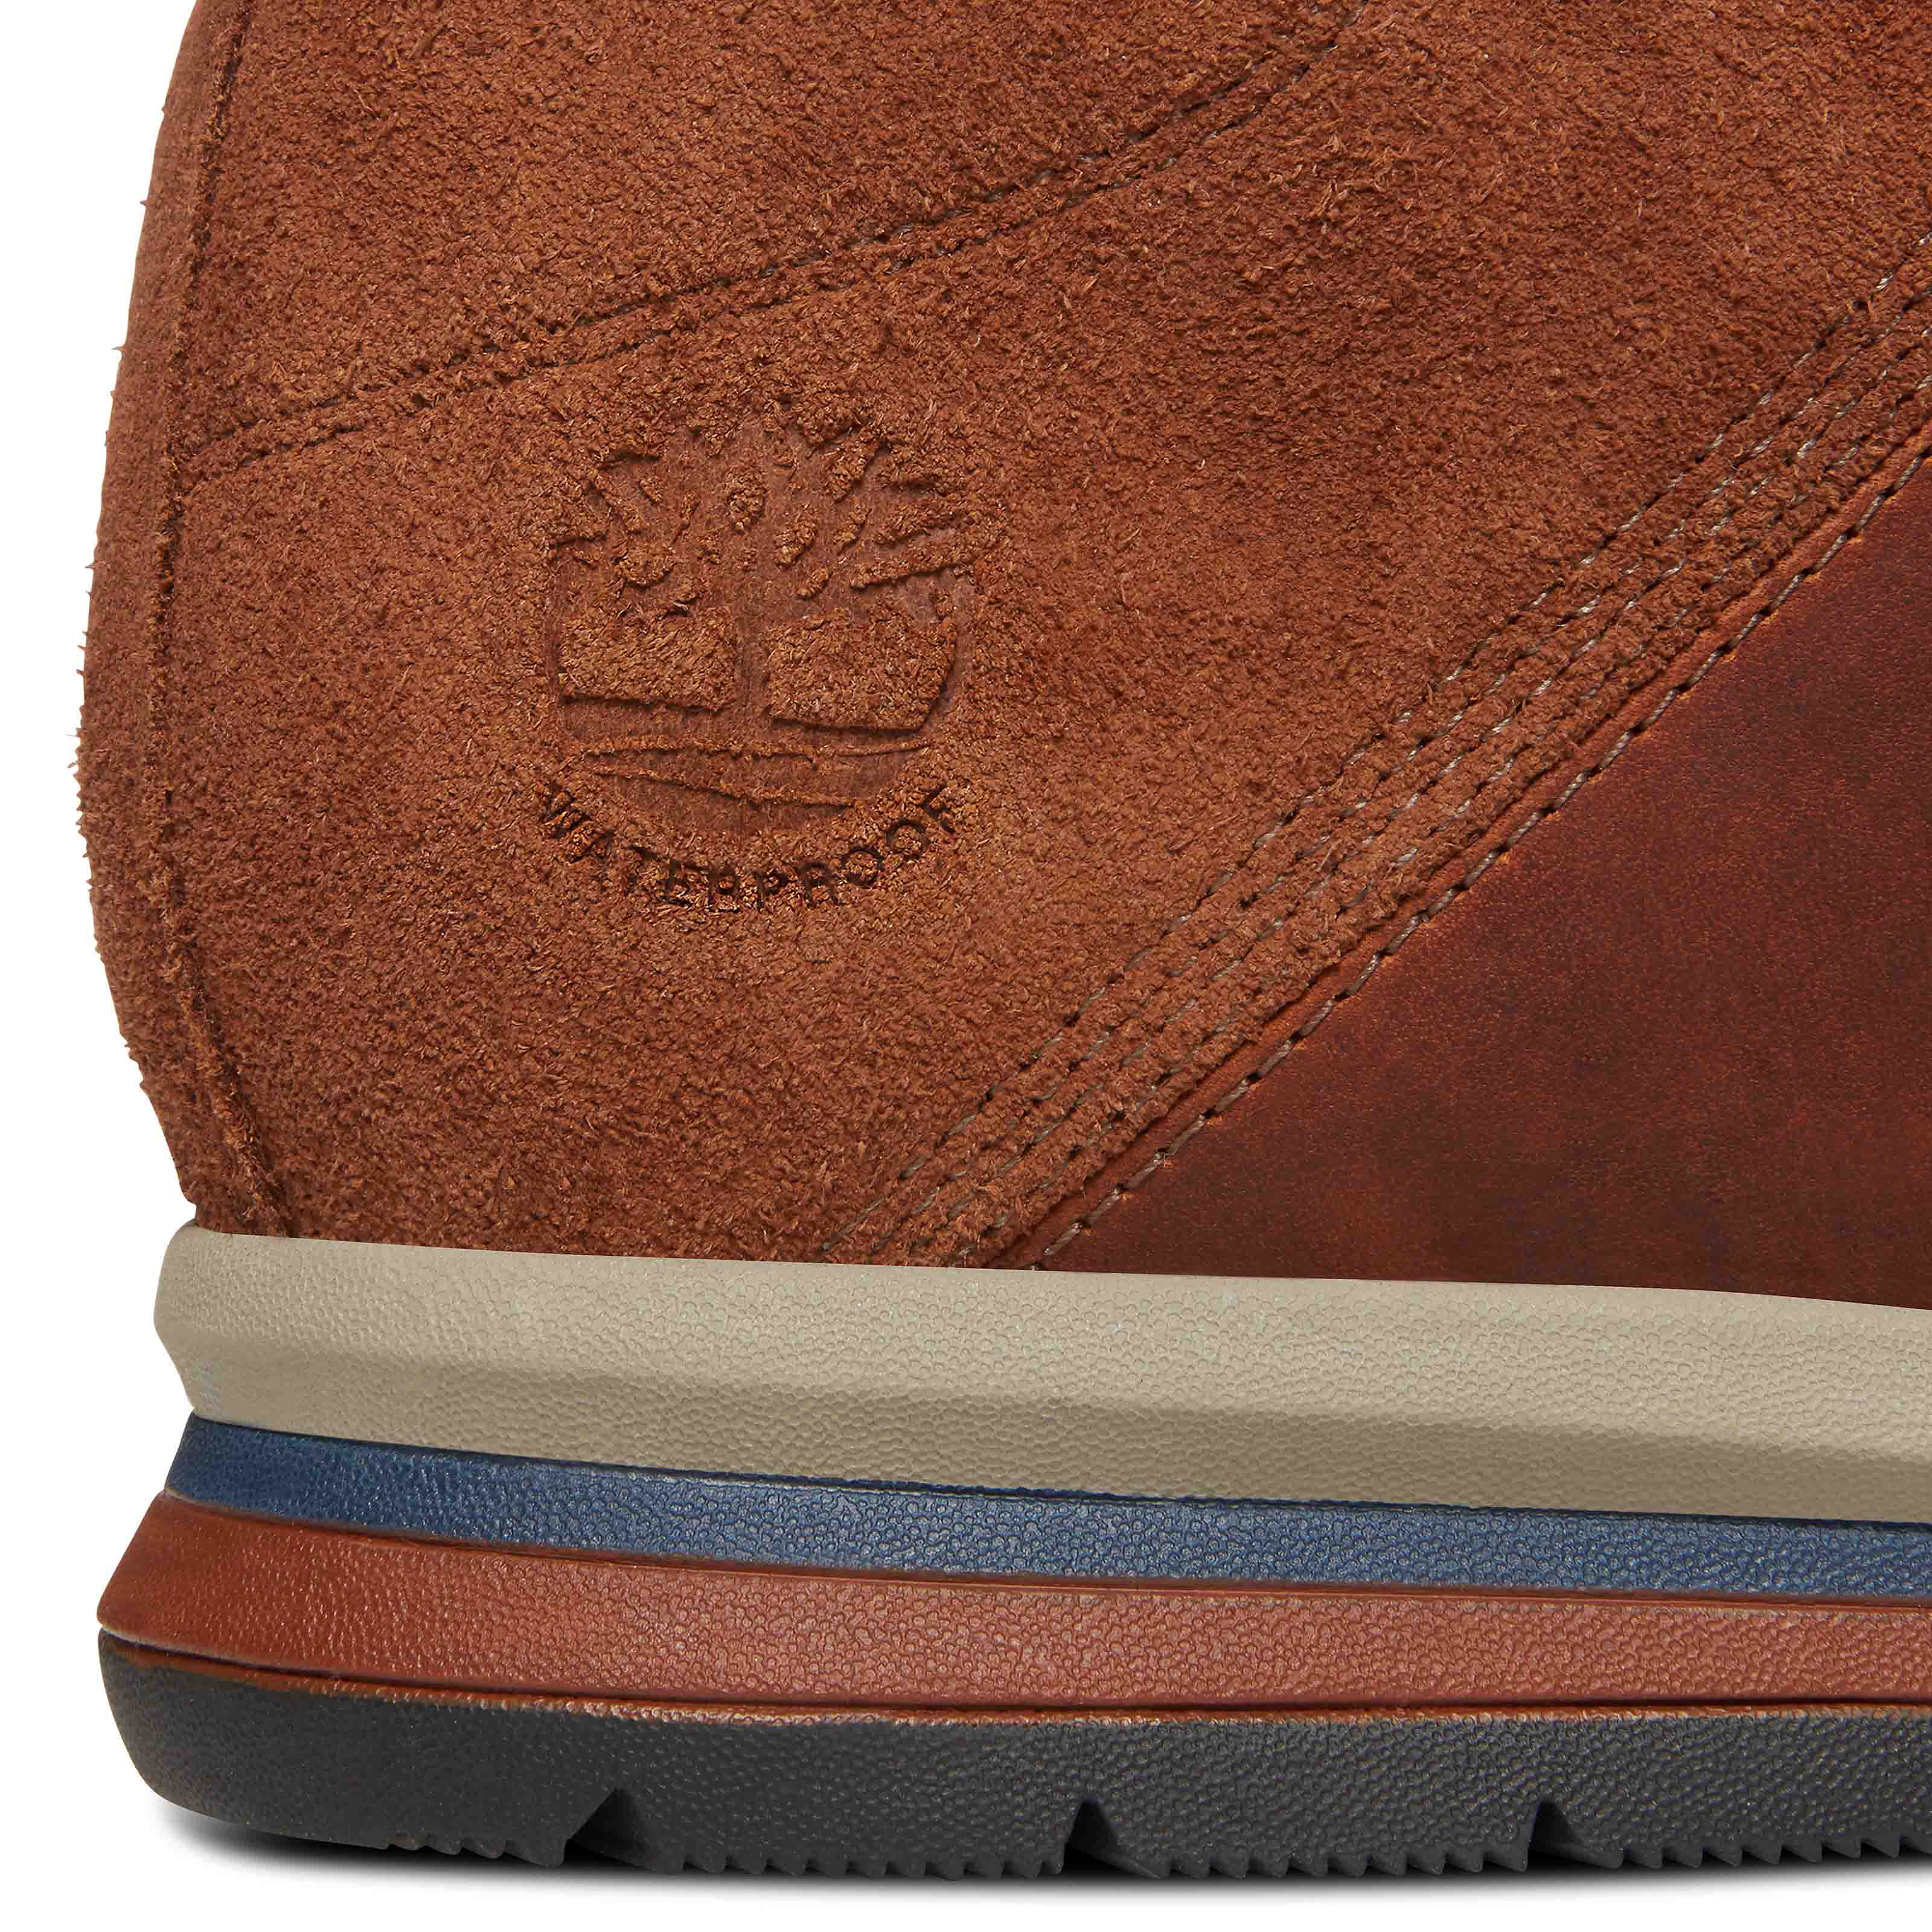 timberland gt rally mid leather